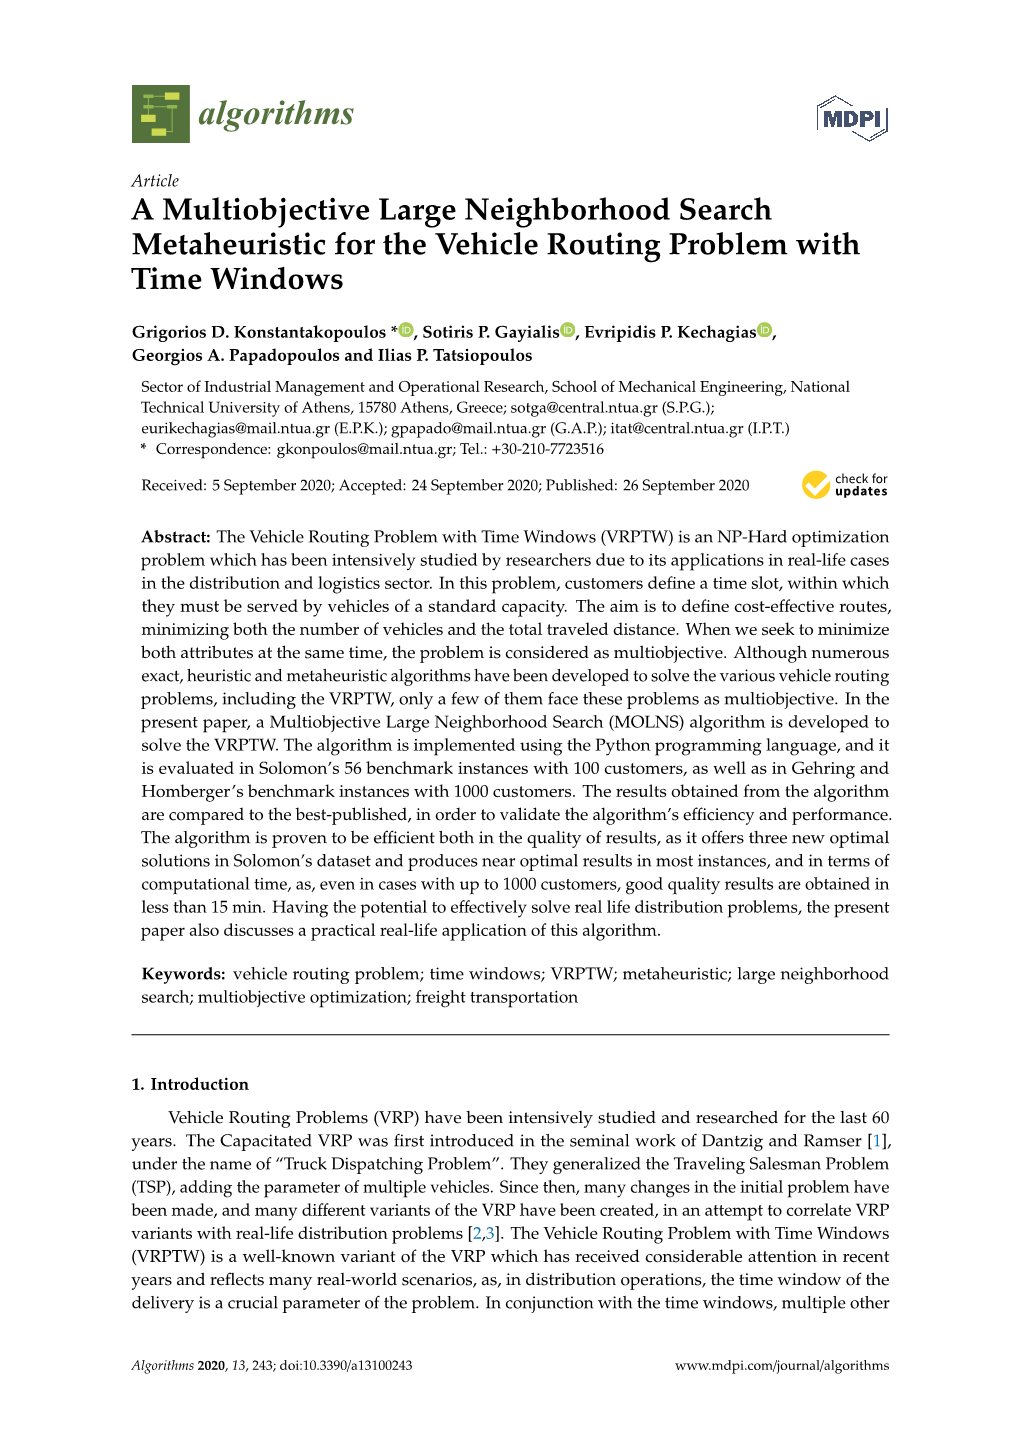 A Multiobjective Large Neighborhood Search Metaheuristic for the Vehicle Routing Problem with Time Windows